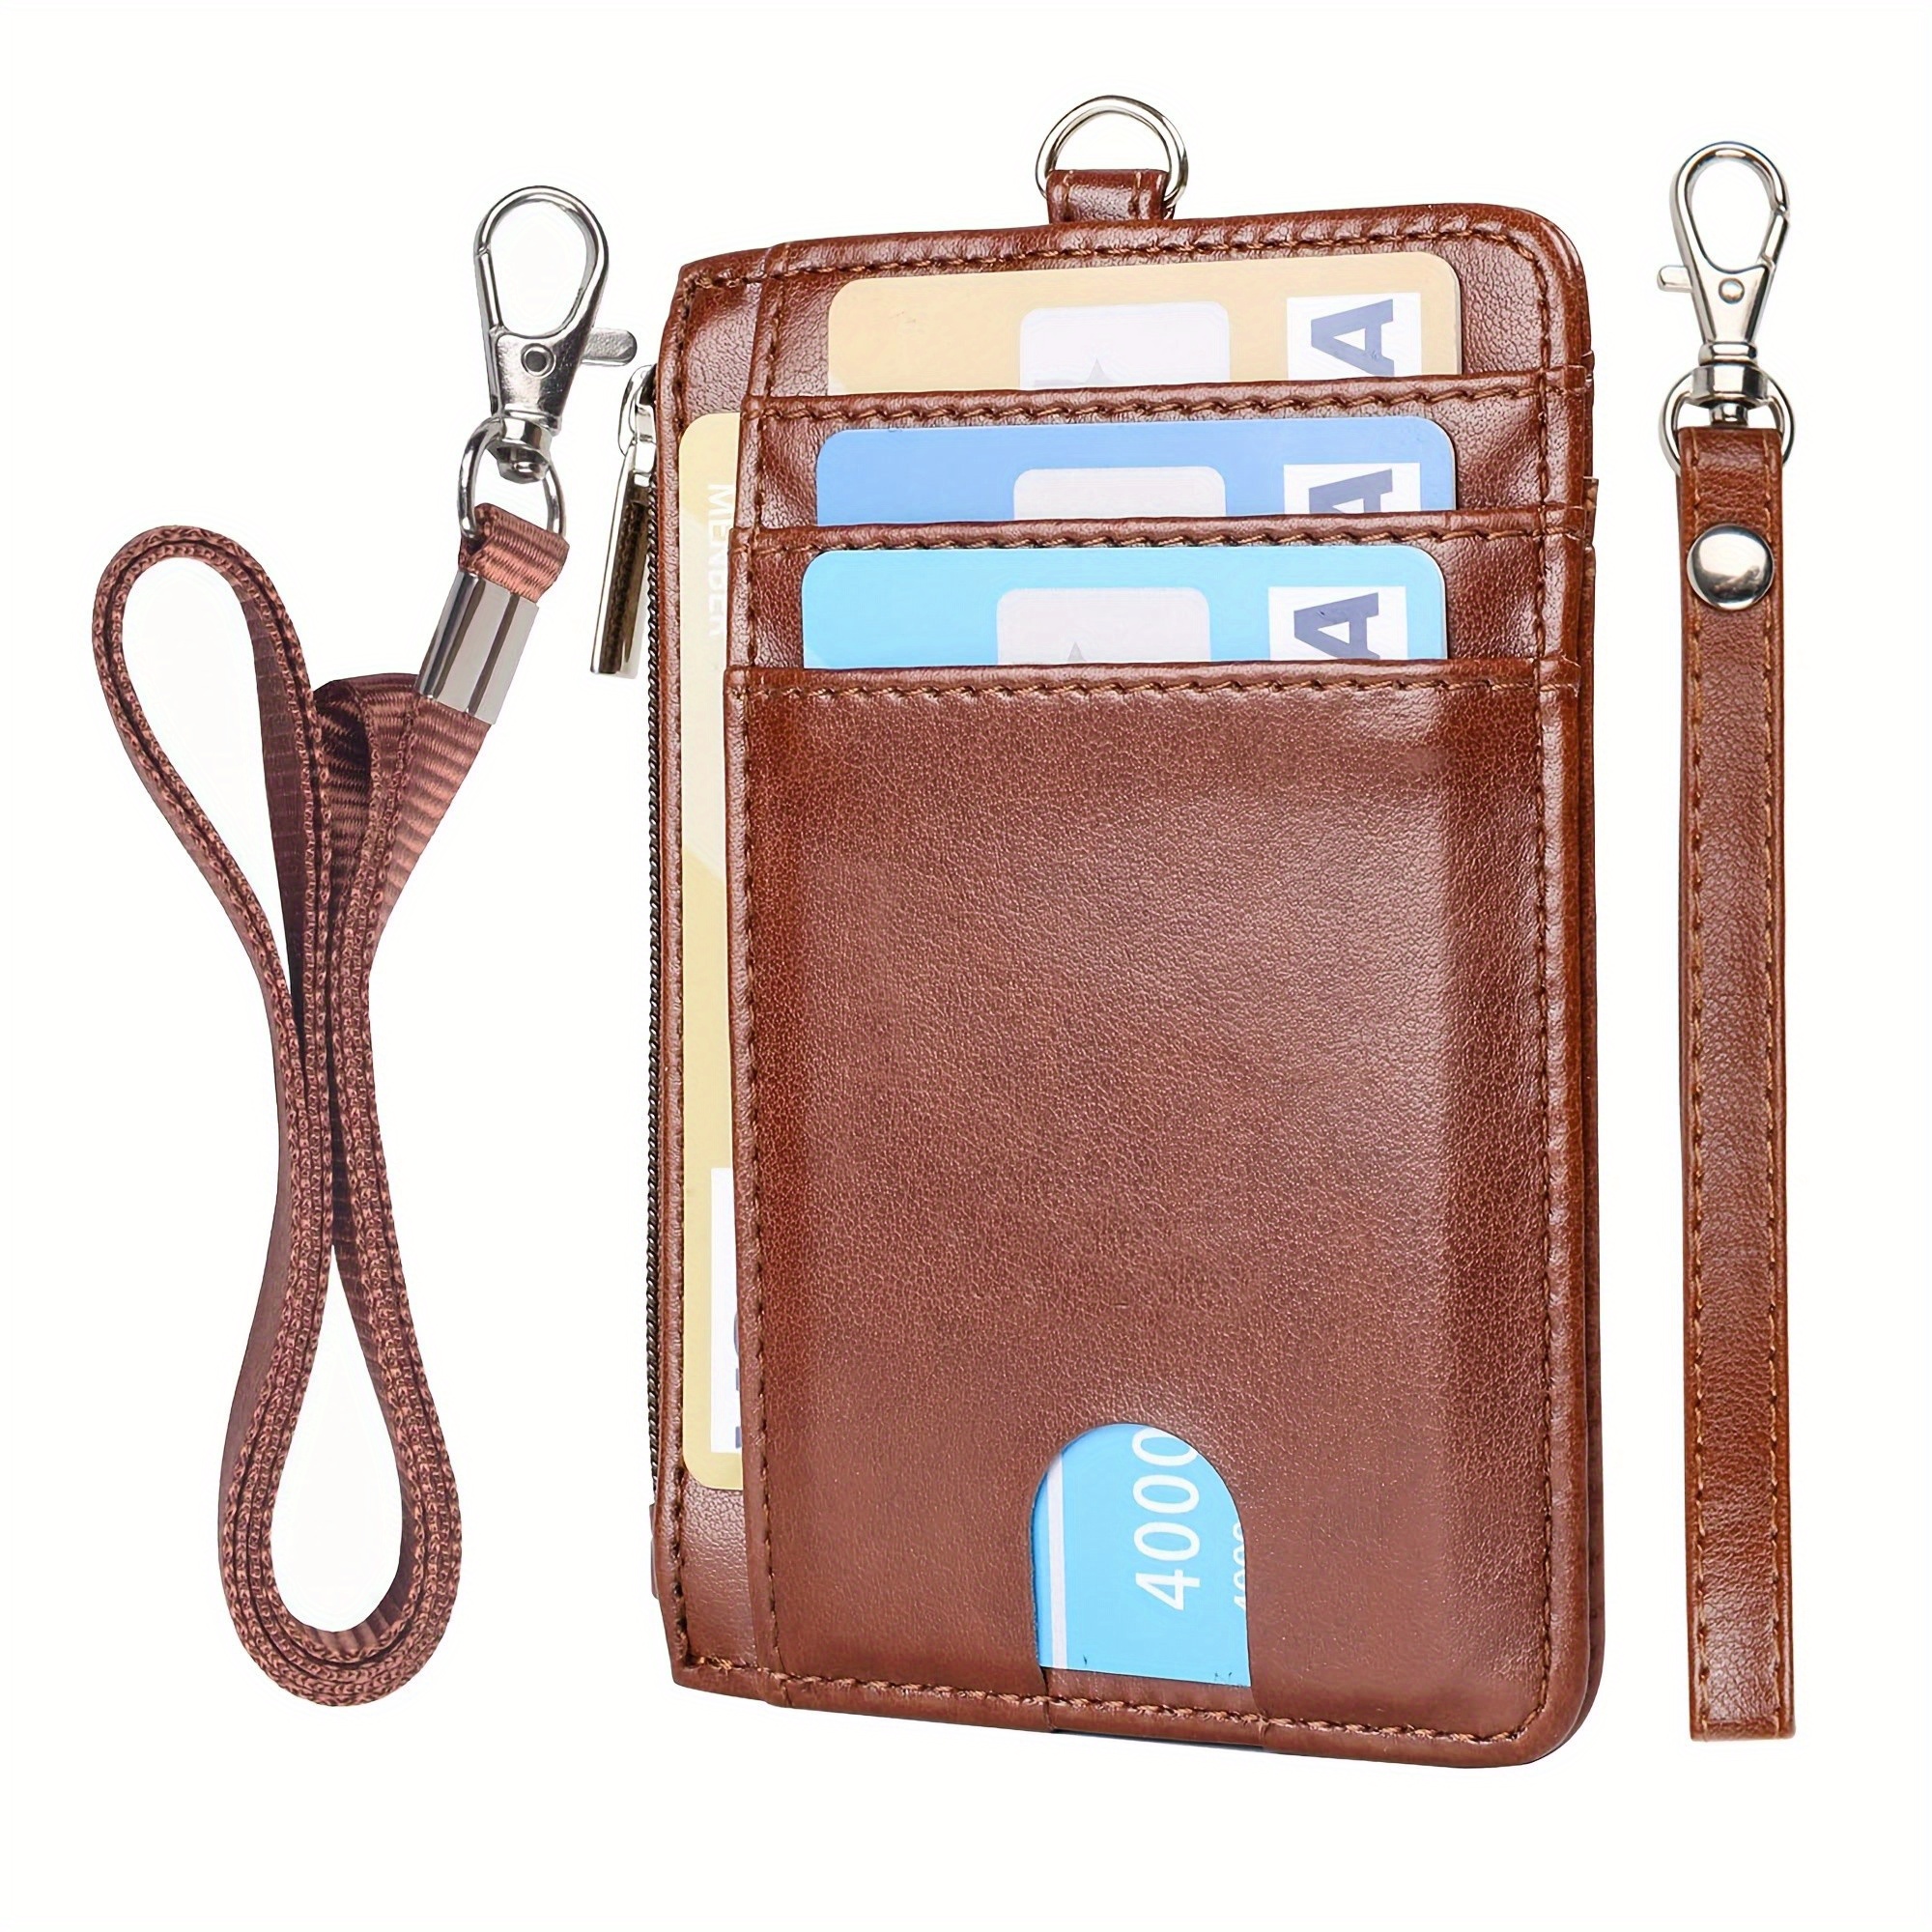 Life-Mate Badge Holder - Leather ID Card Holder Wallet Case with 3 Cards Slot and Neck Lanyard/Strap. Additional Retractable Badge Reel with Belt